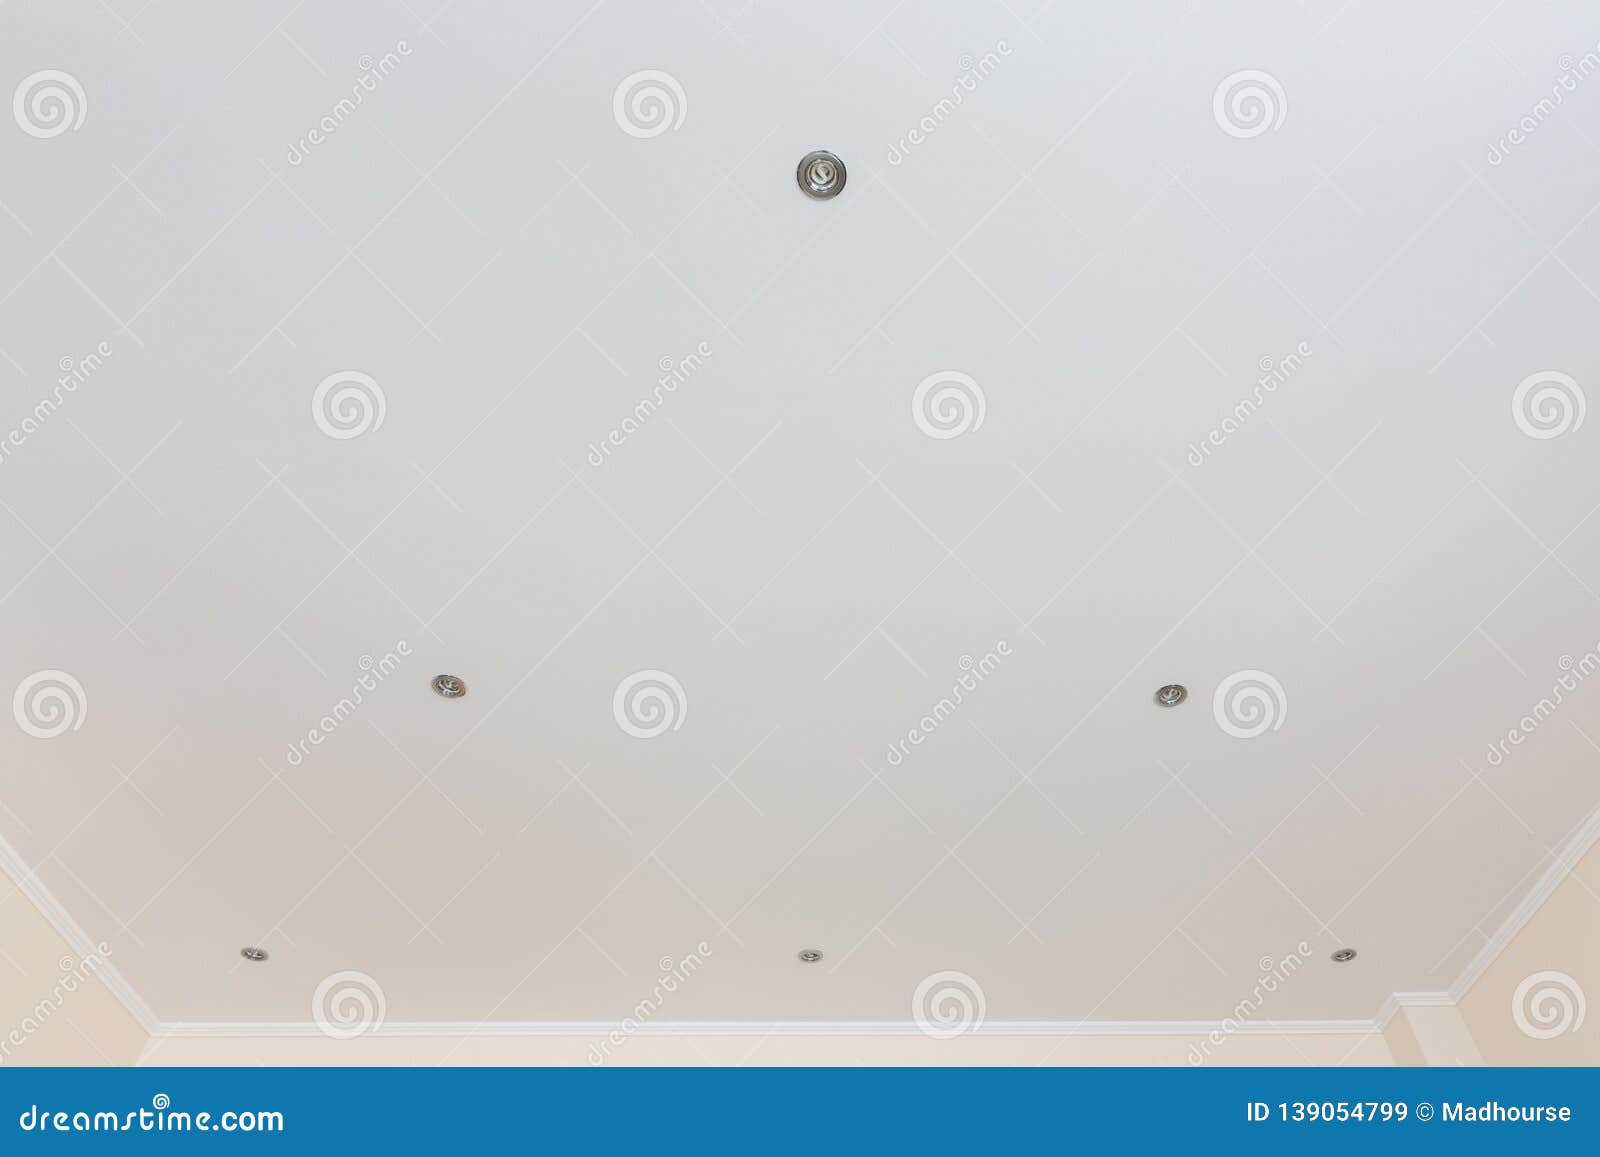 Suspended Ceiling Plasterboard With Built In Lights Stock